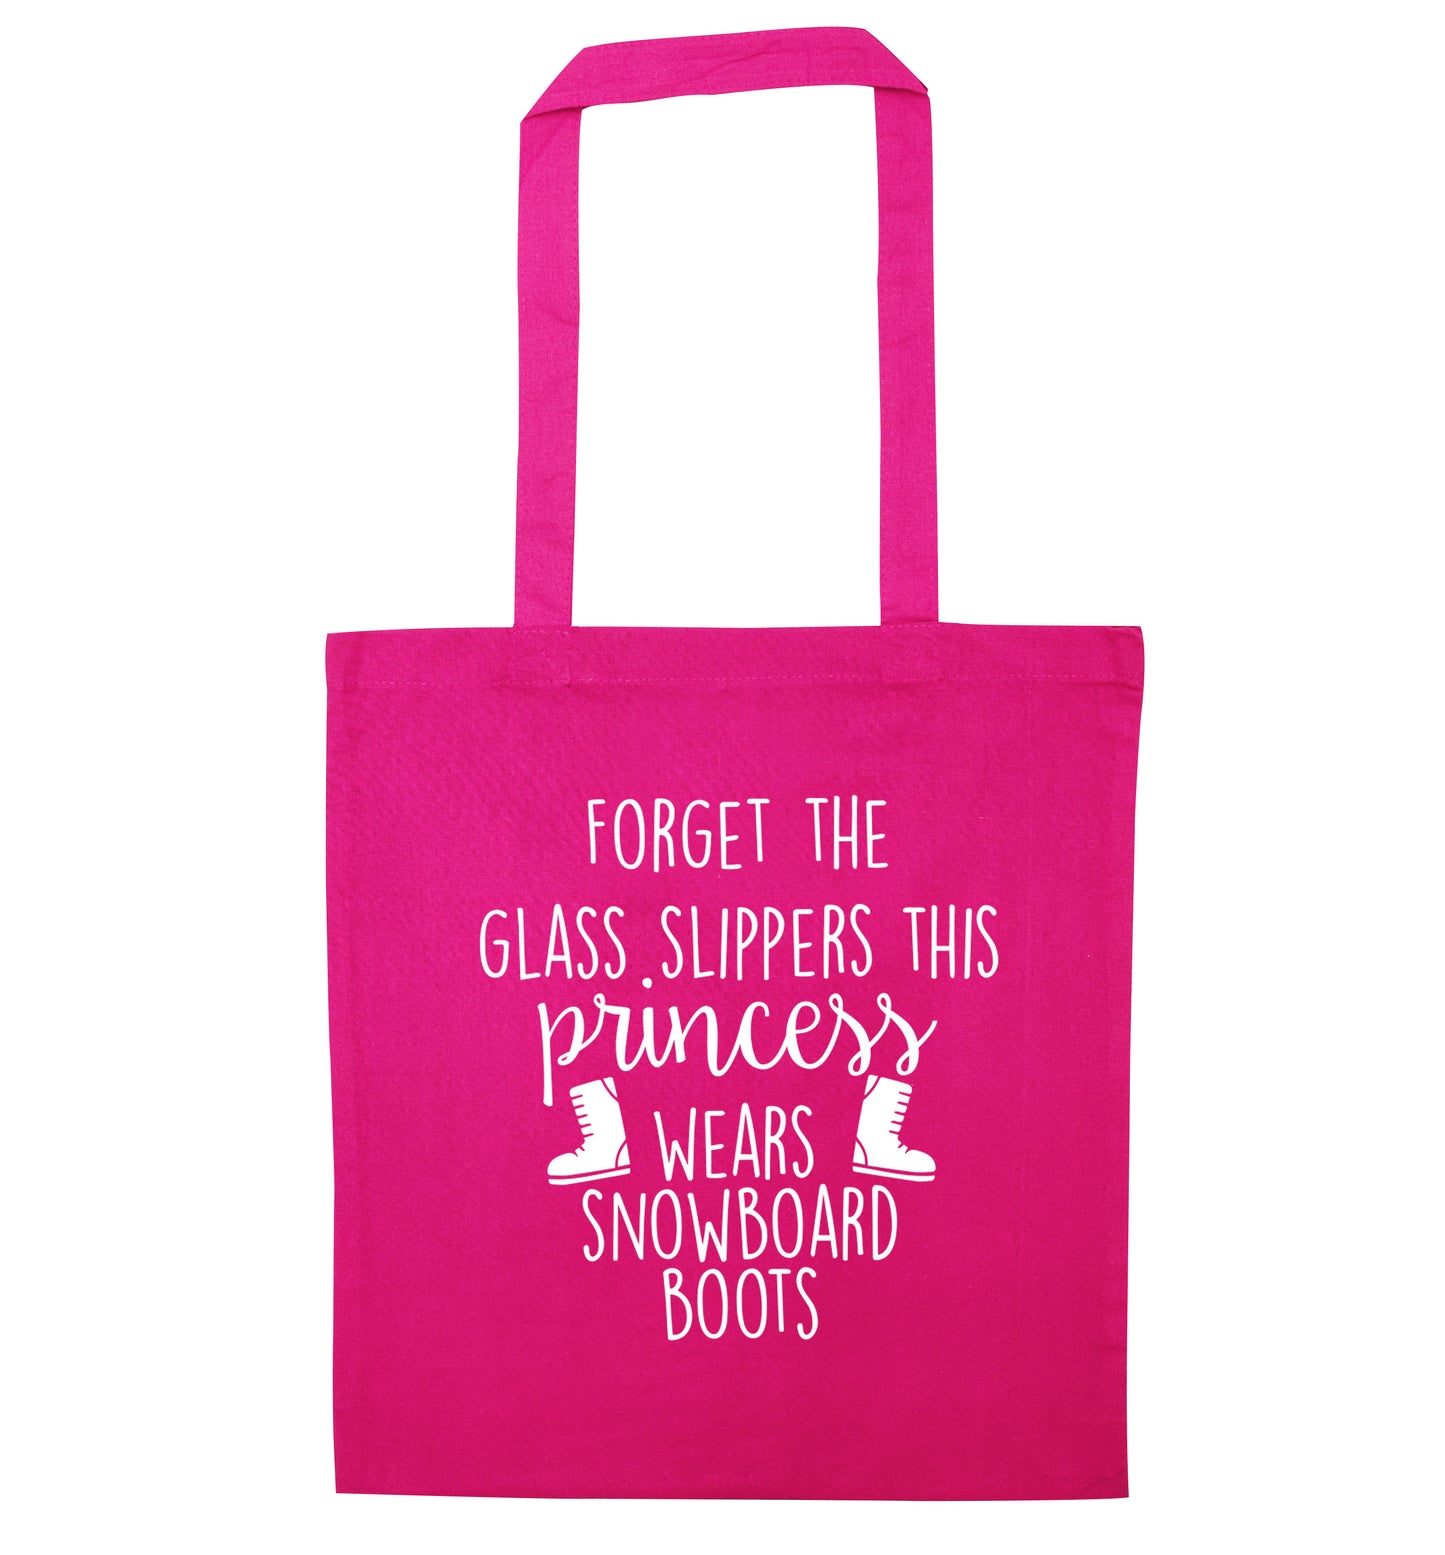 Forget the glass slippers this princess wears snowboard boots pink tote bag